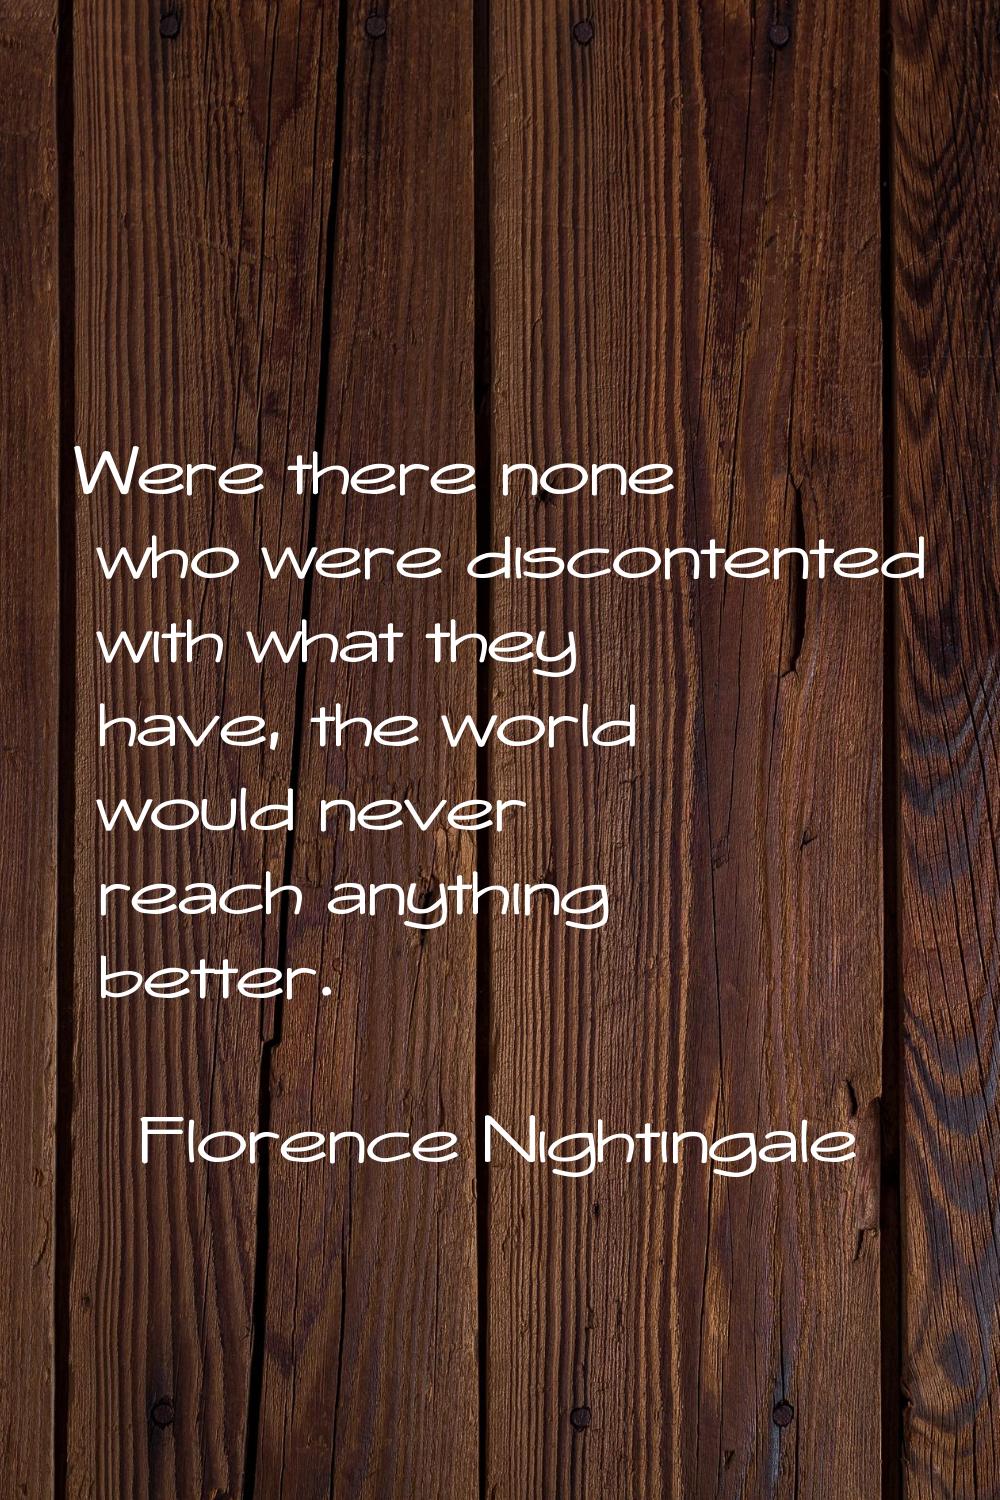 Were there none who were discontented with what they have, the world would never reach anything bet